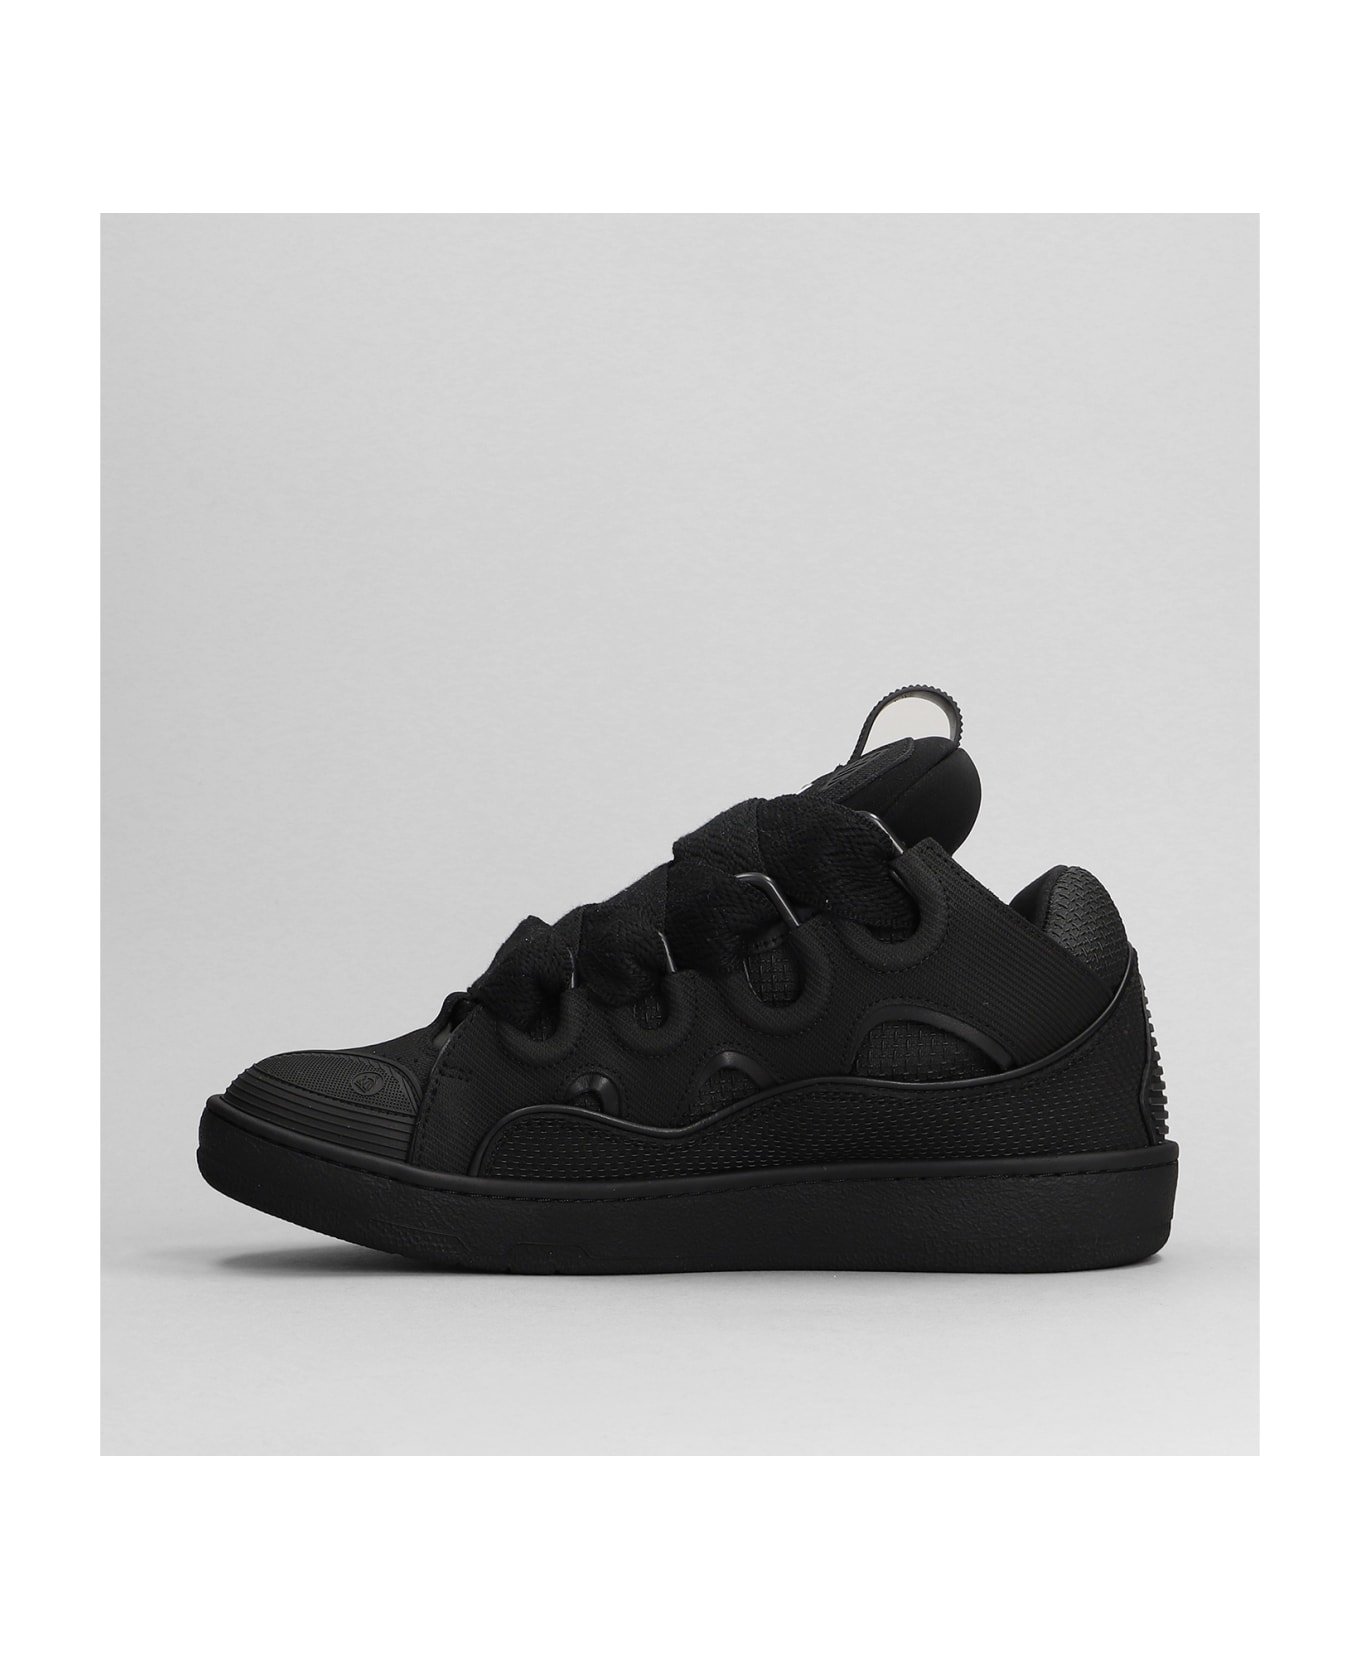 Lanvin Curb Sneakers In Black Leather - black スニーカー